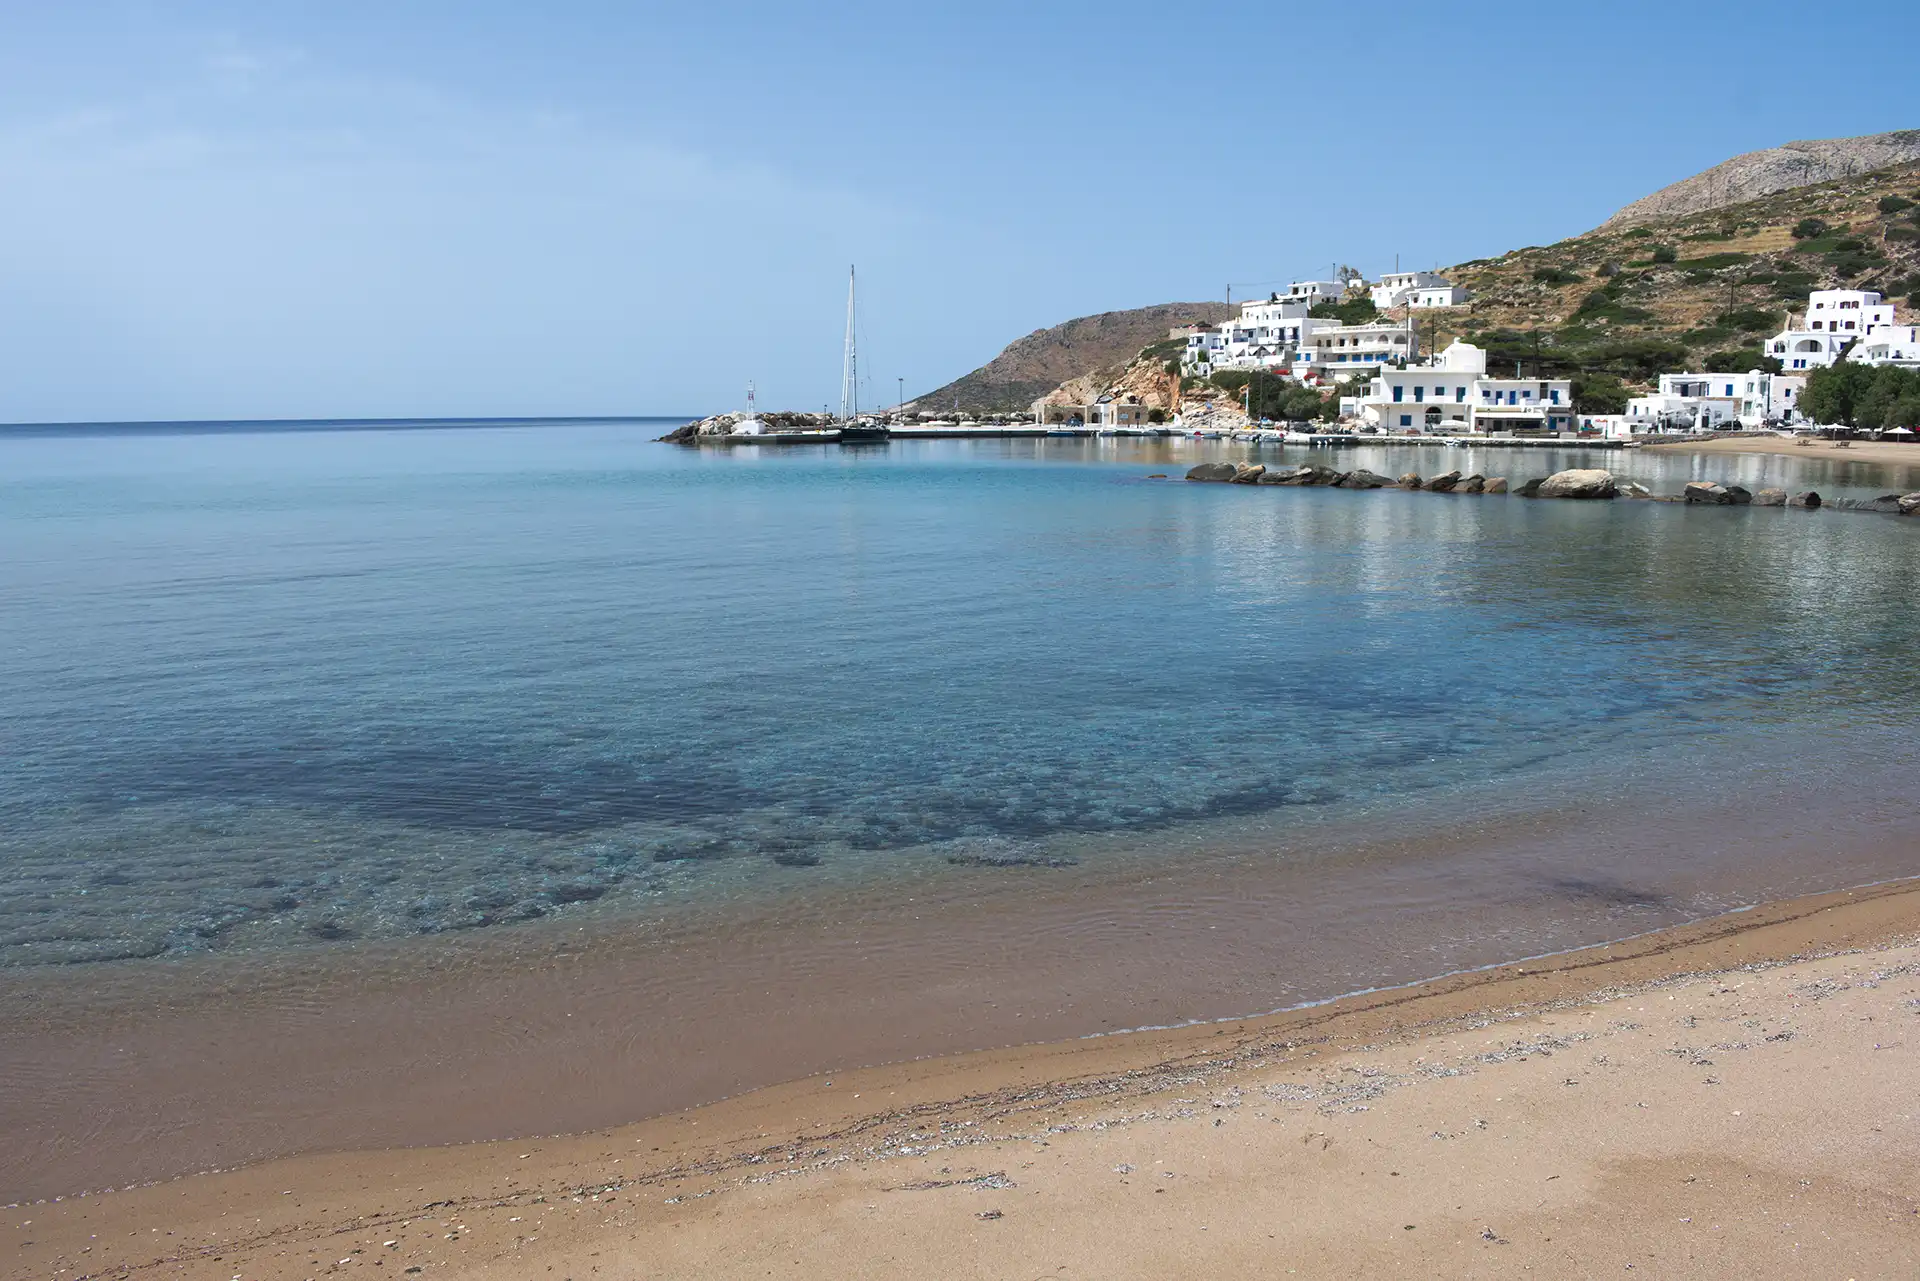 Greece, the quiet island of Sikinos in the Cyclades chain. The harbor beach. A spring day before the summer crowds. The weather is perfect and the beach is your own. See Less